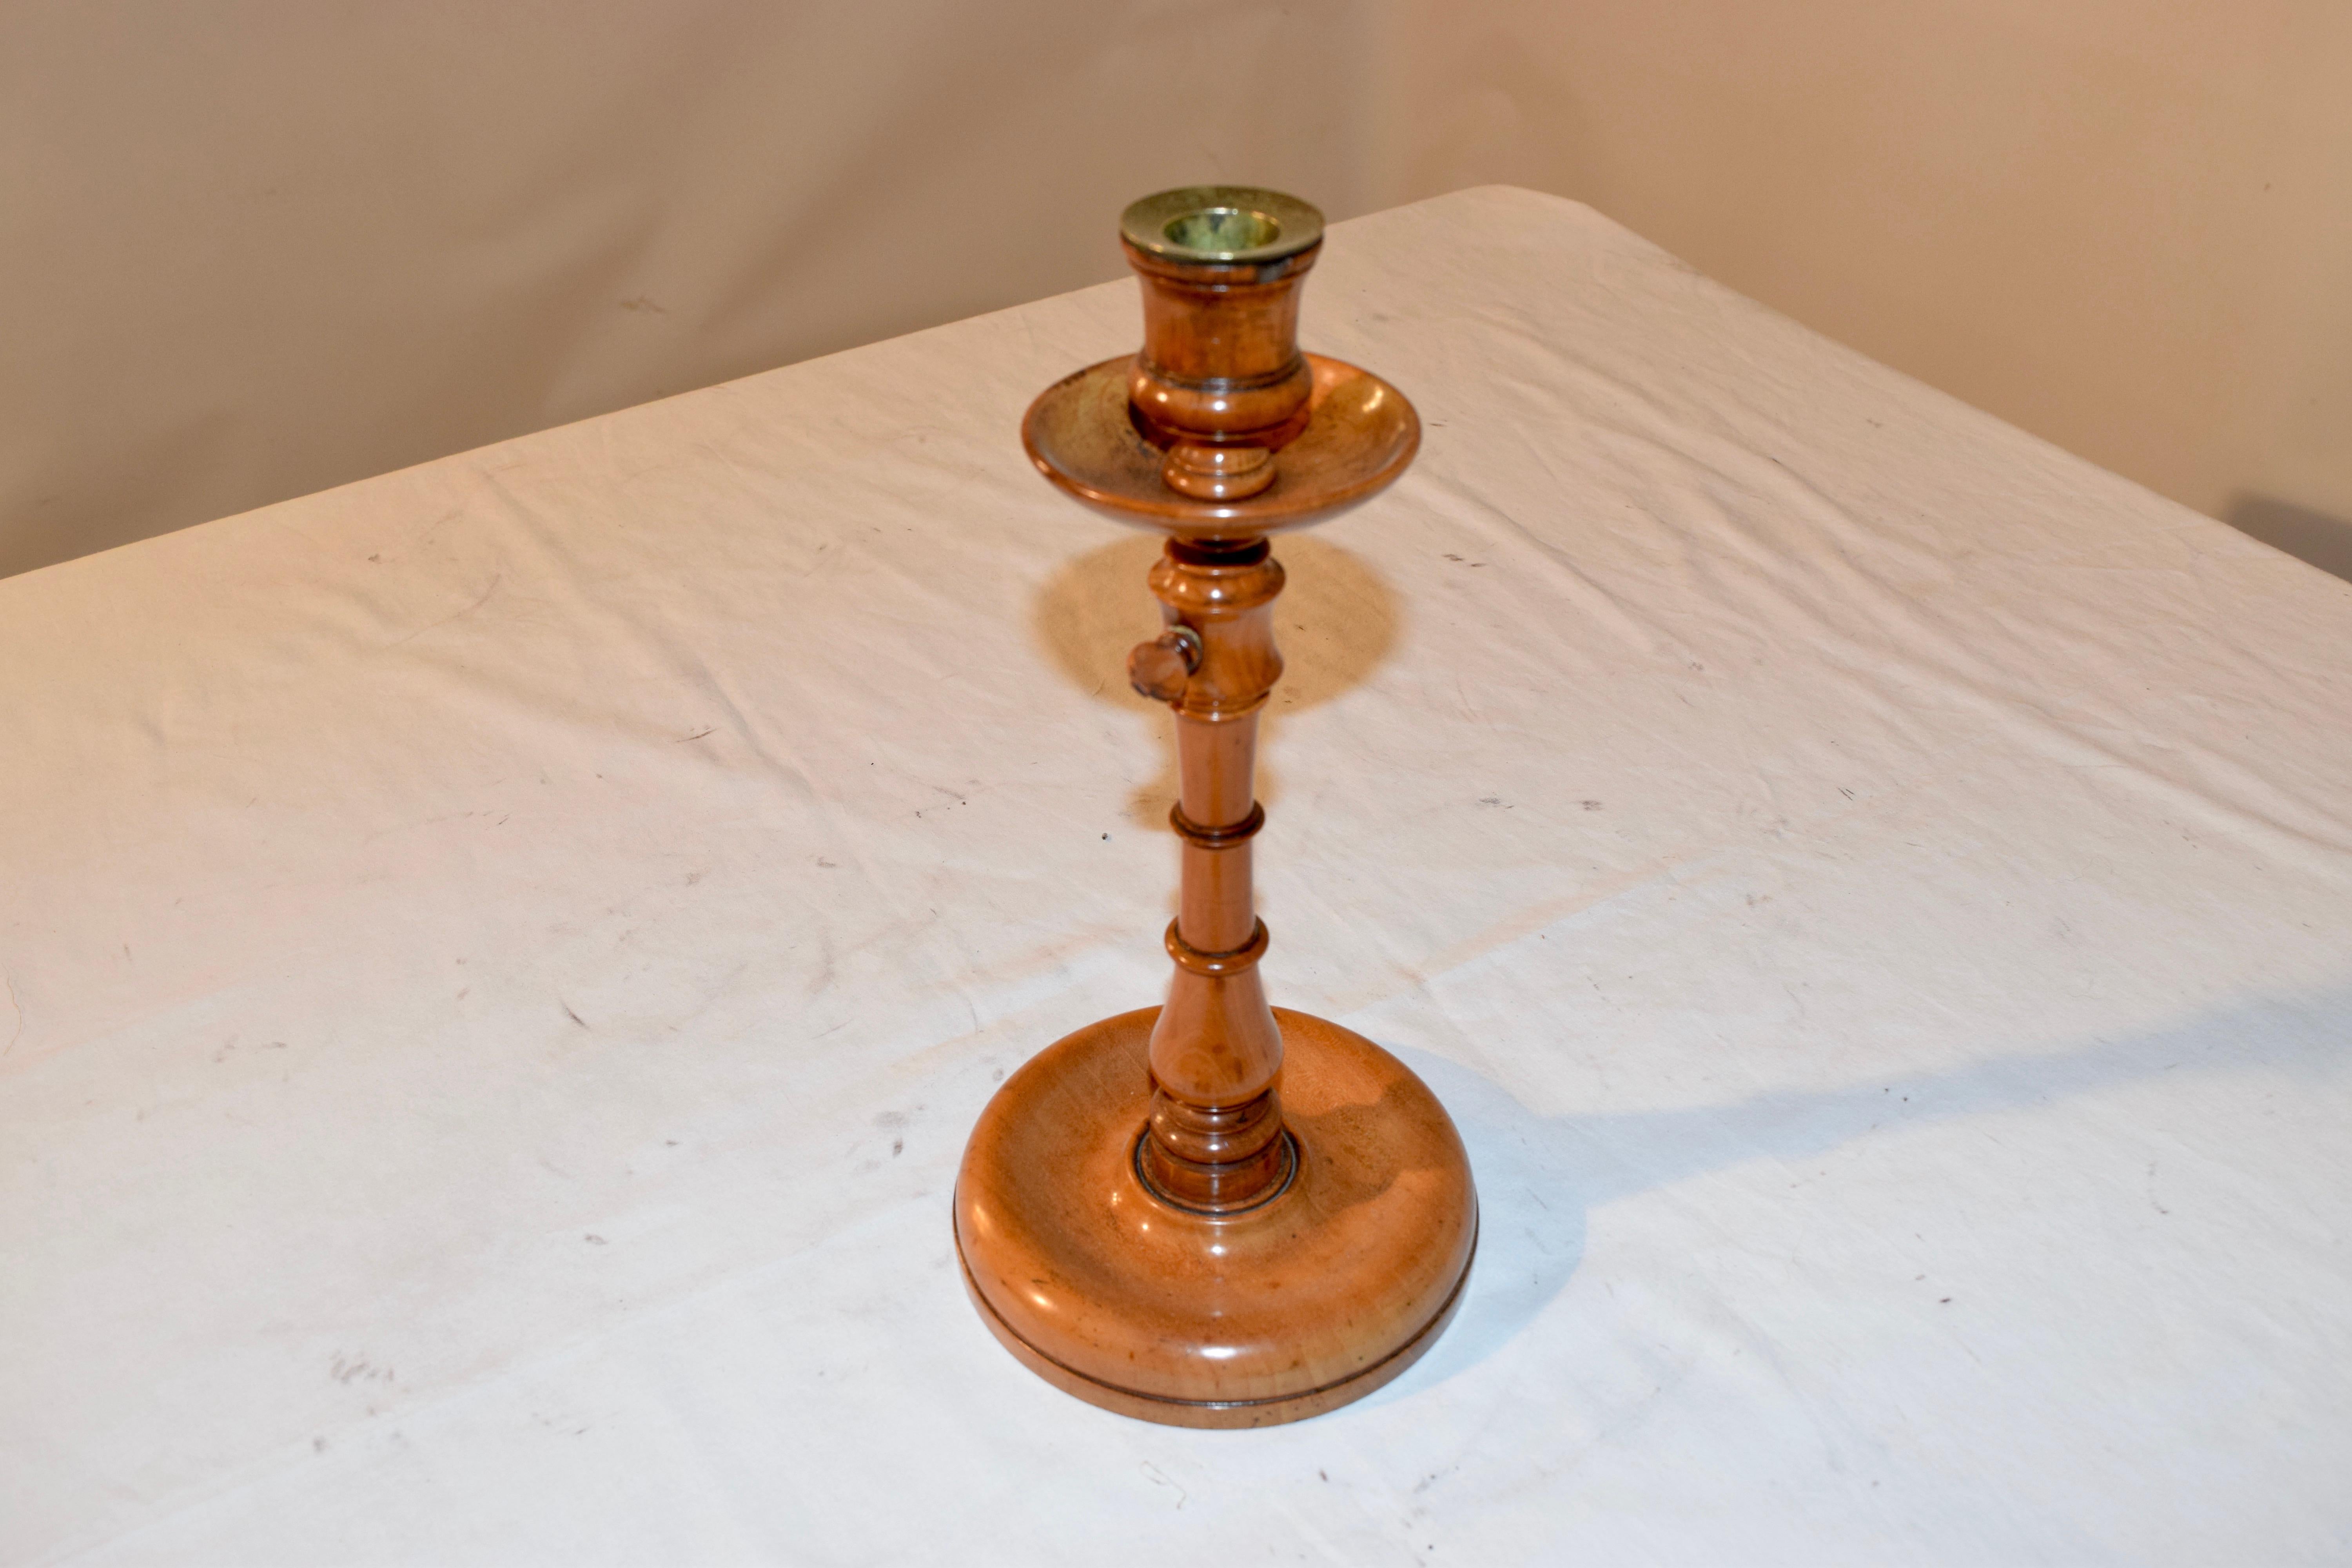 Early 19th century candlestick from England with lovely hand turning and a telescopic stem for tasing and lowering the candle height.